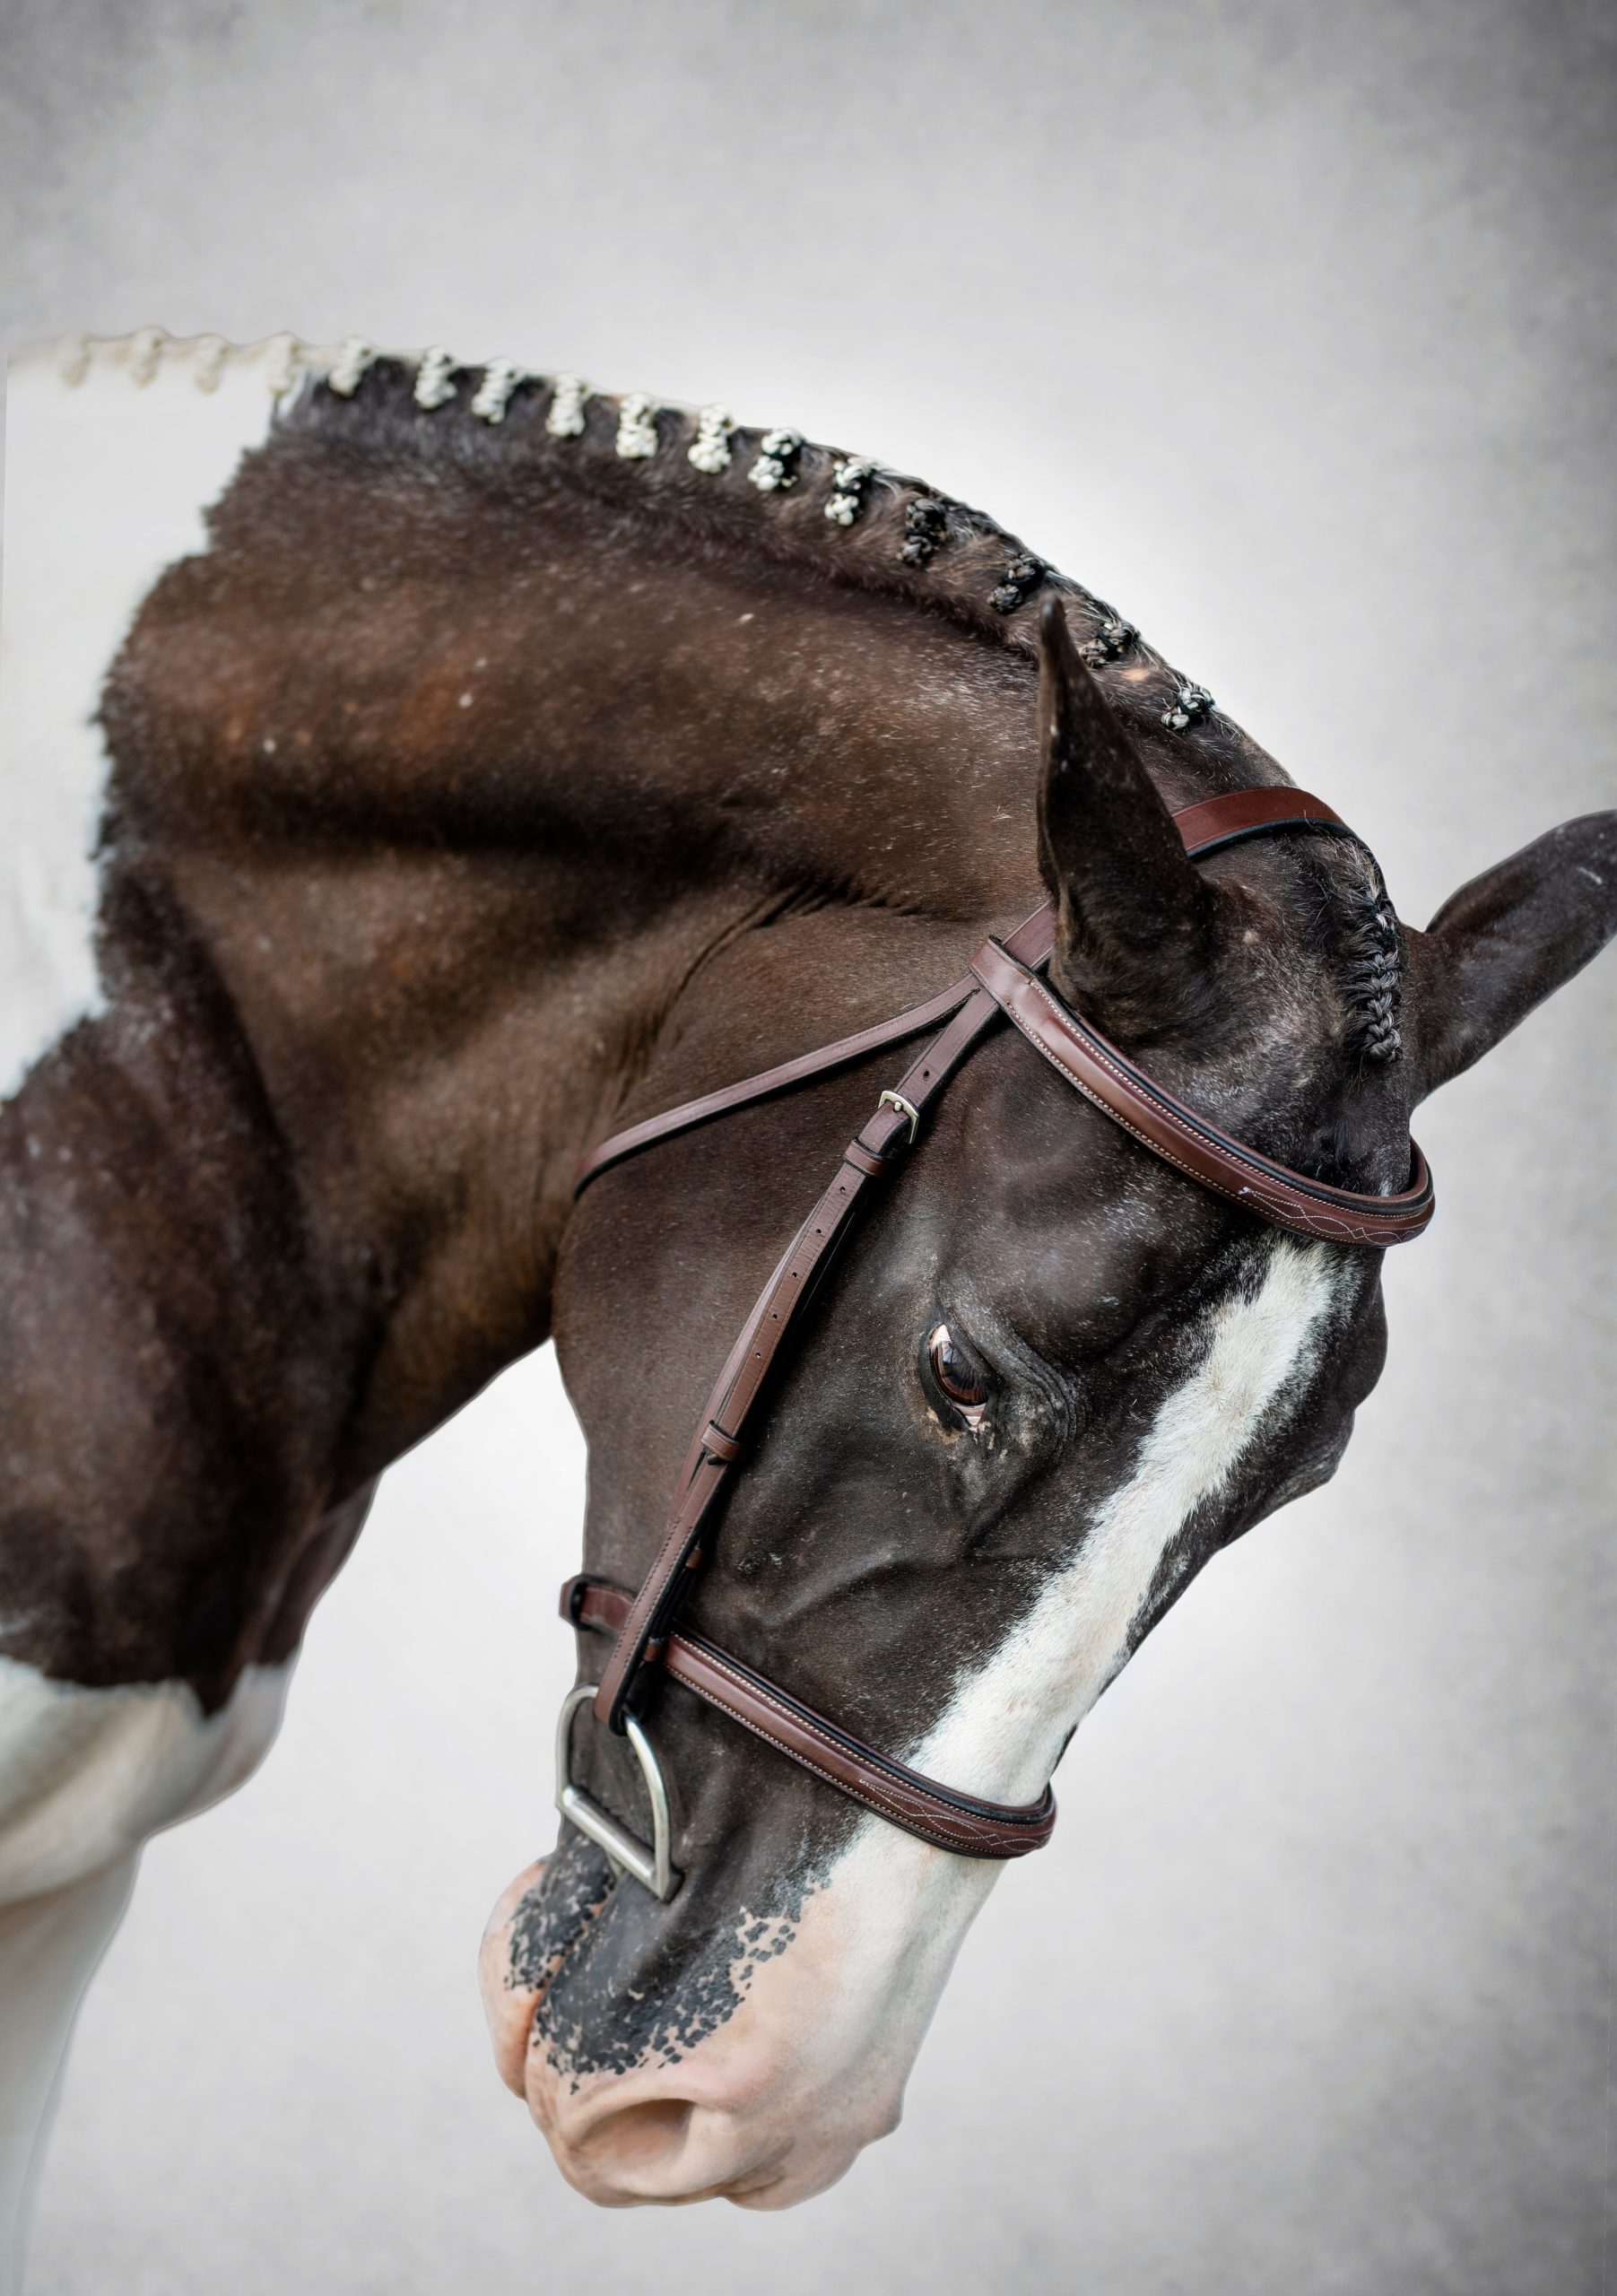 Appaloosa horse photographer takes fine art photos to show off coloring.